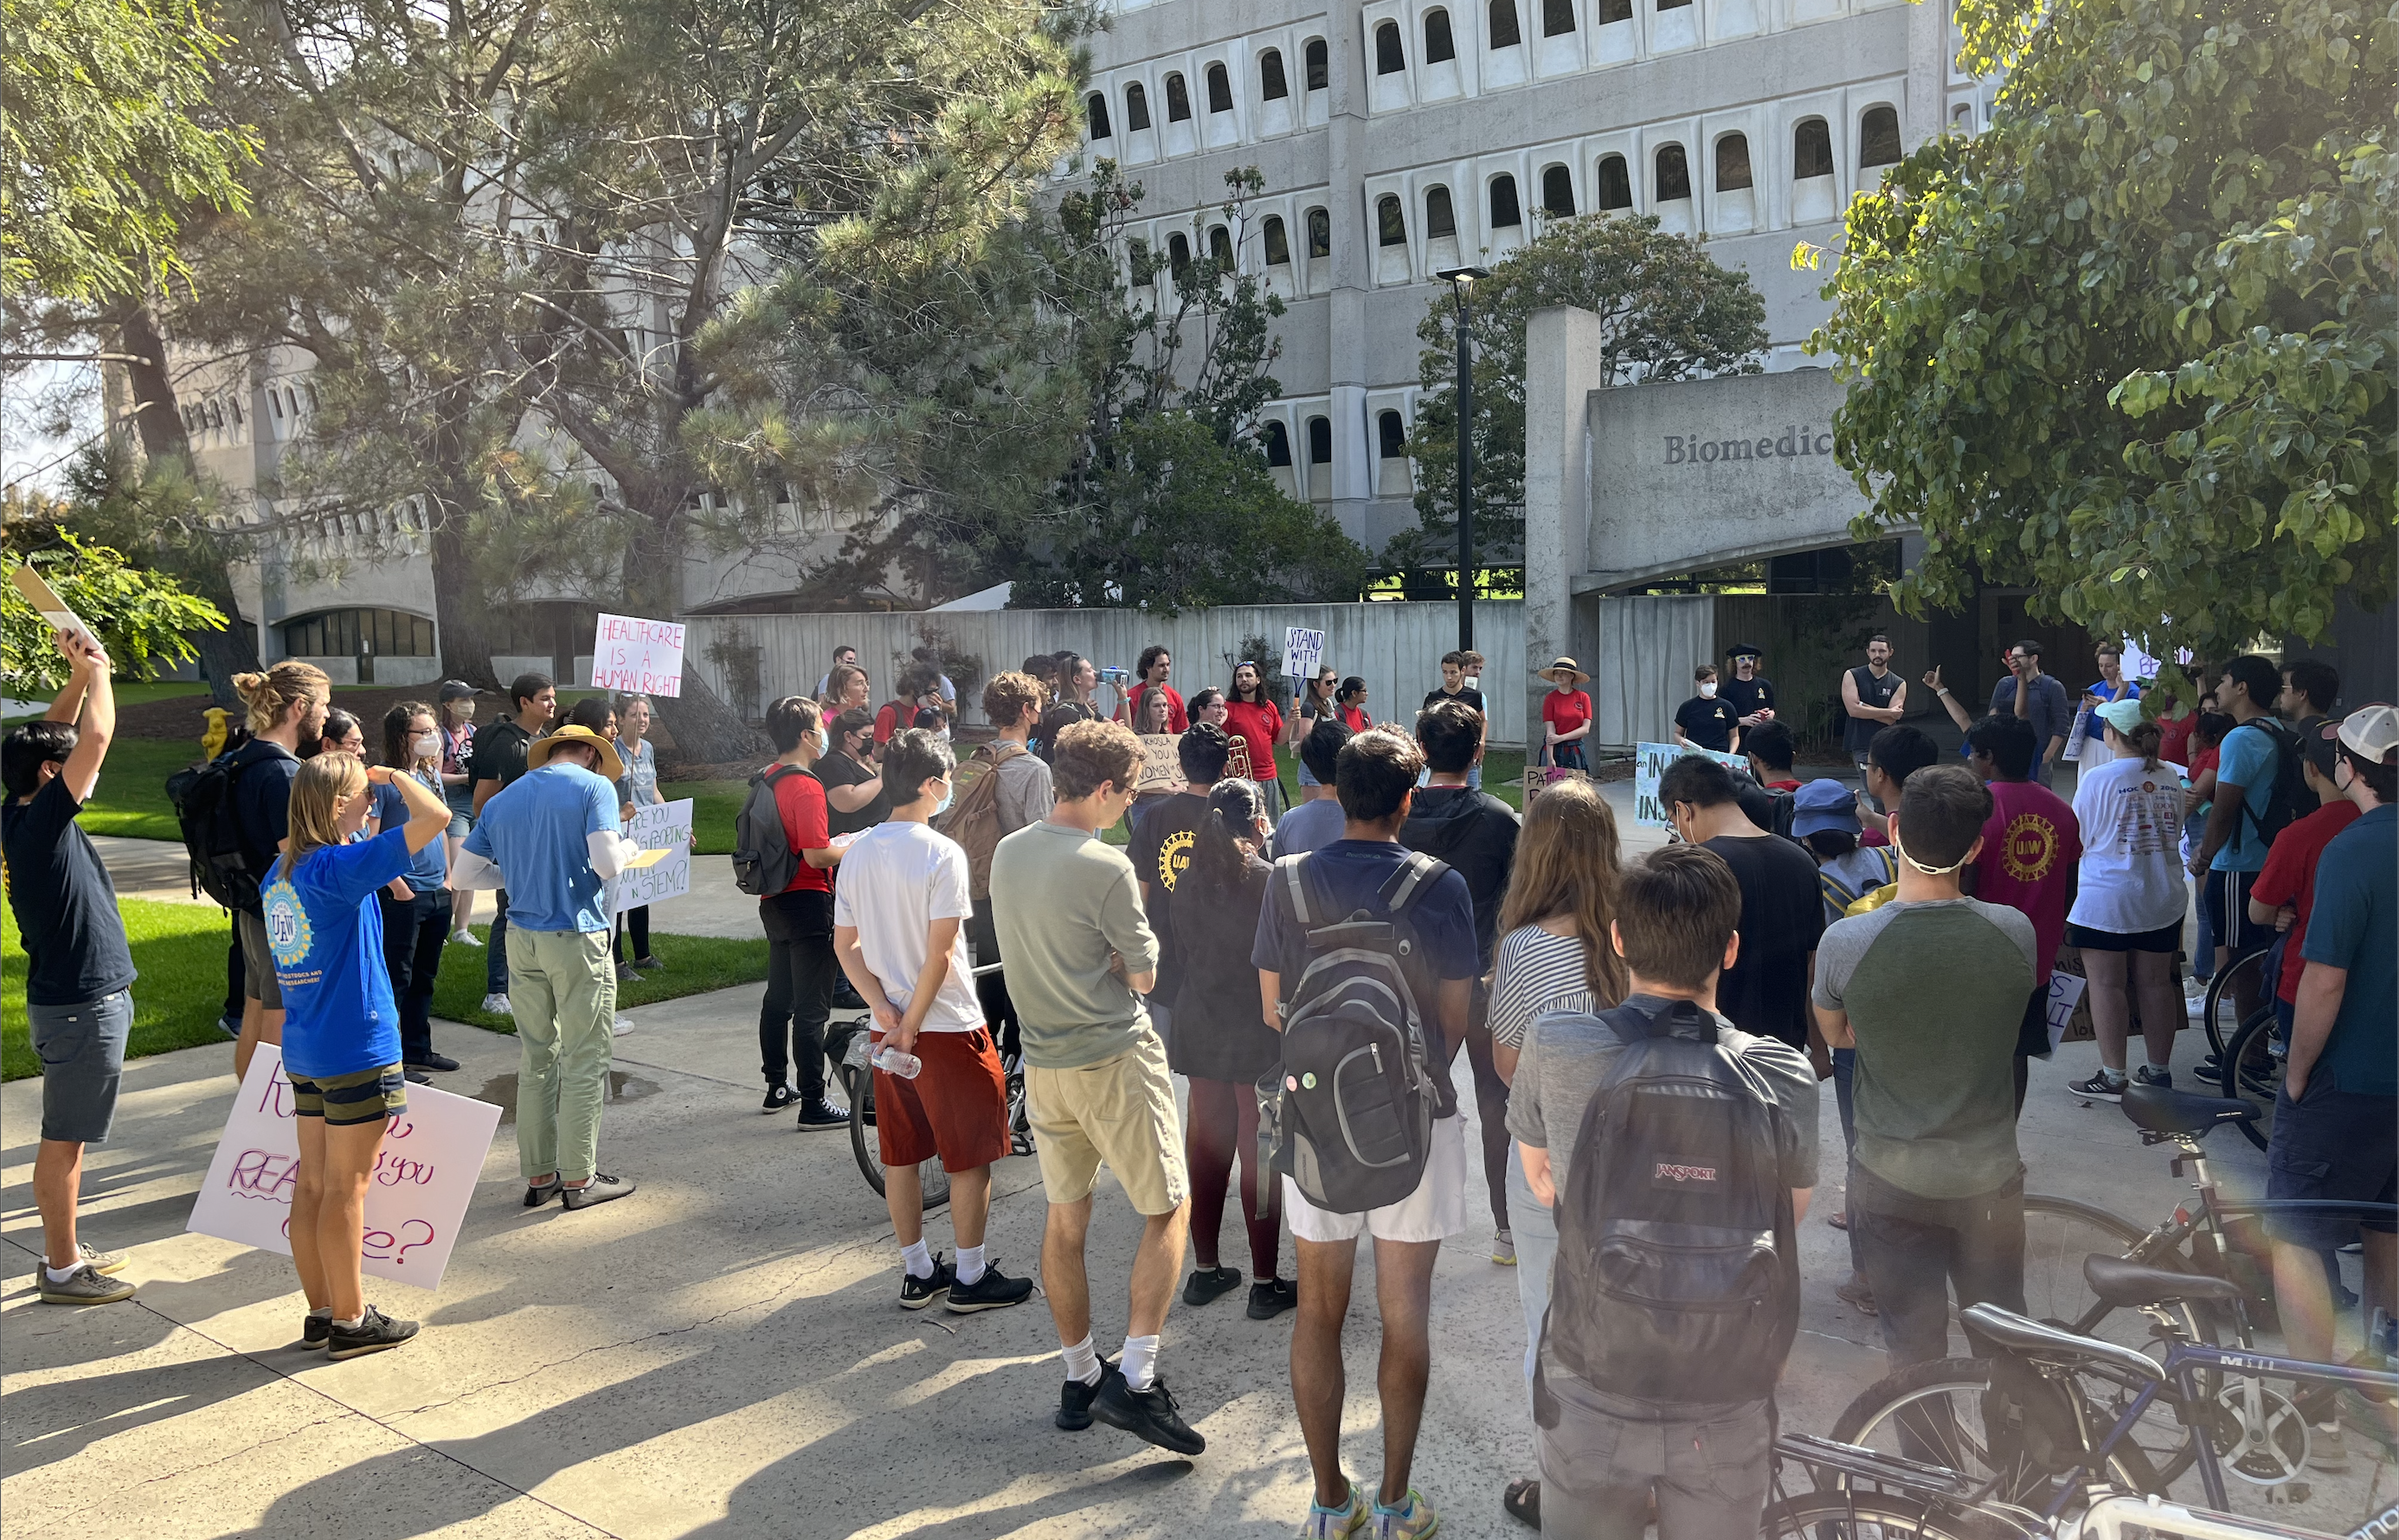 A crowd of dozens of workers holding picket signs and wearing UAW union shirts blocks the entrance to the Biomedical Sciences Building at UC San Diego